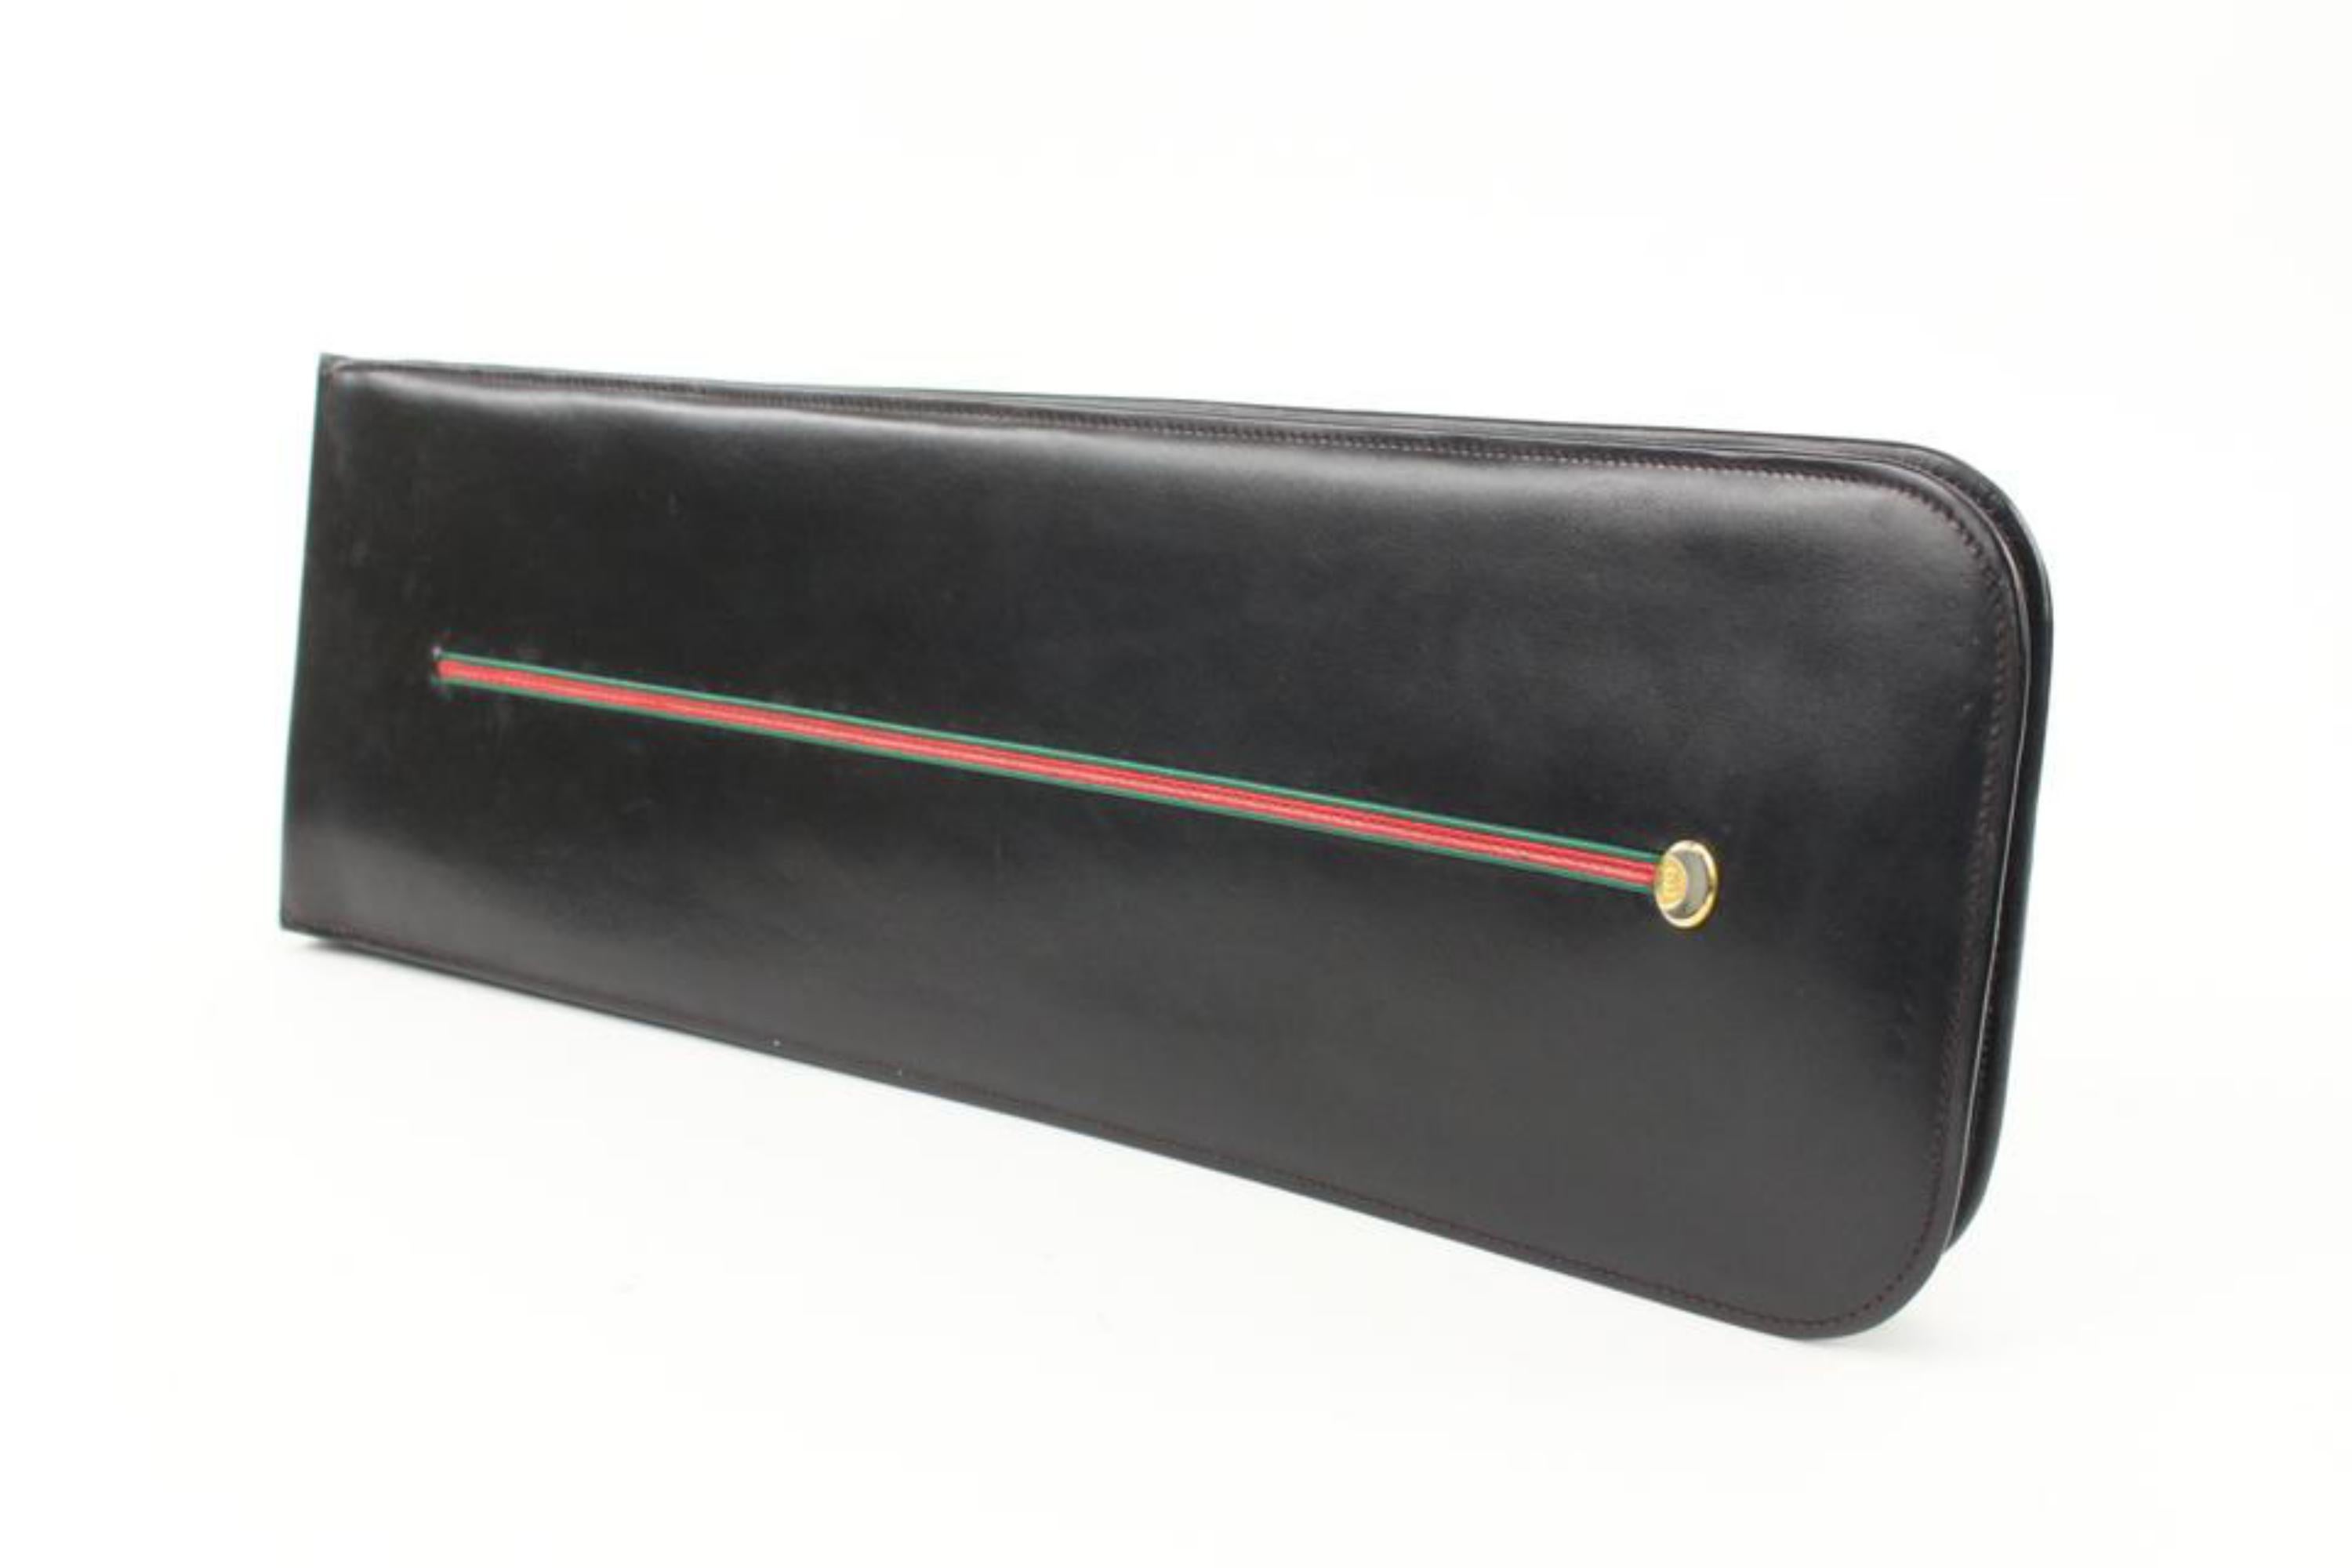 Gucci Vintage Black Leather Web Tie Case s29g39
Made In: Italy
Measurements: Length:  16.5